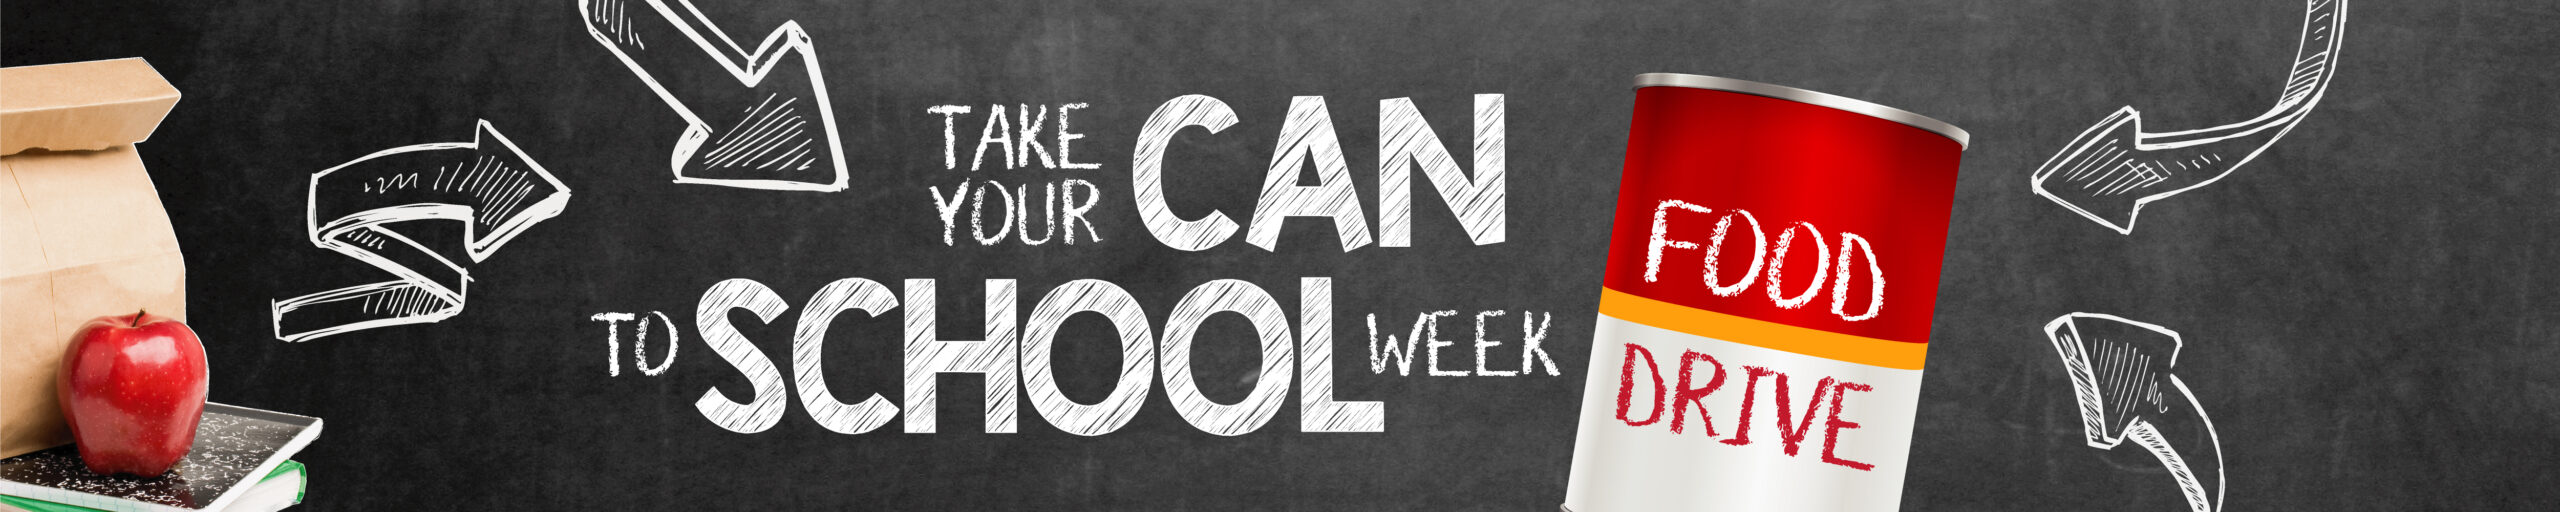 Take Your Can To School Week